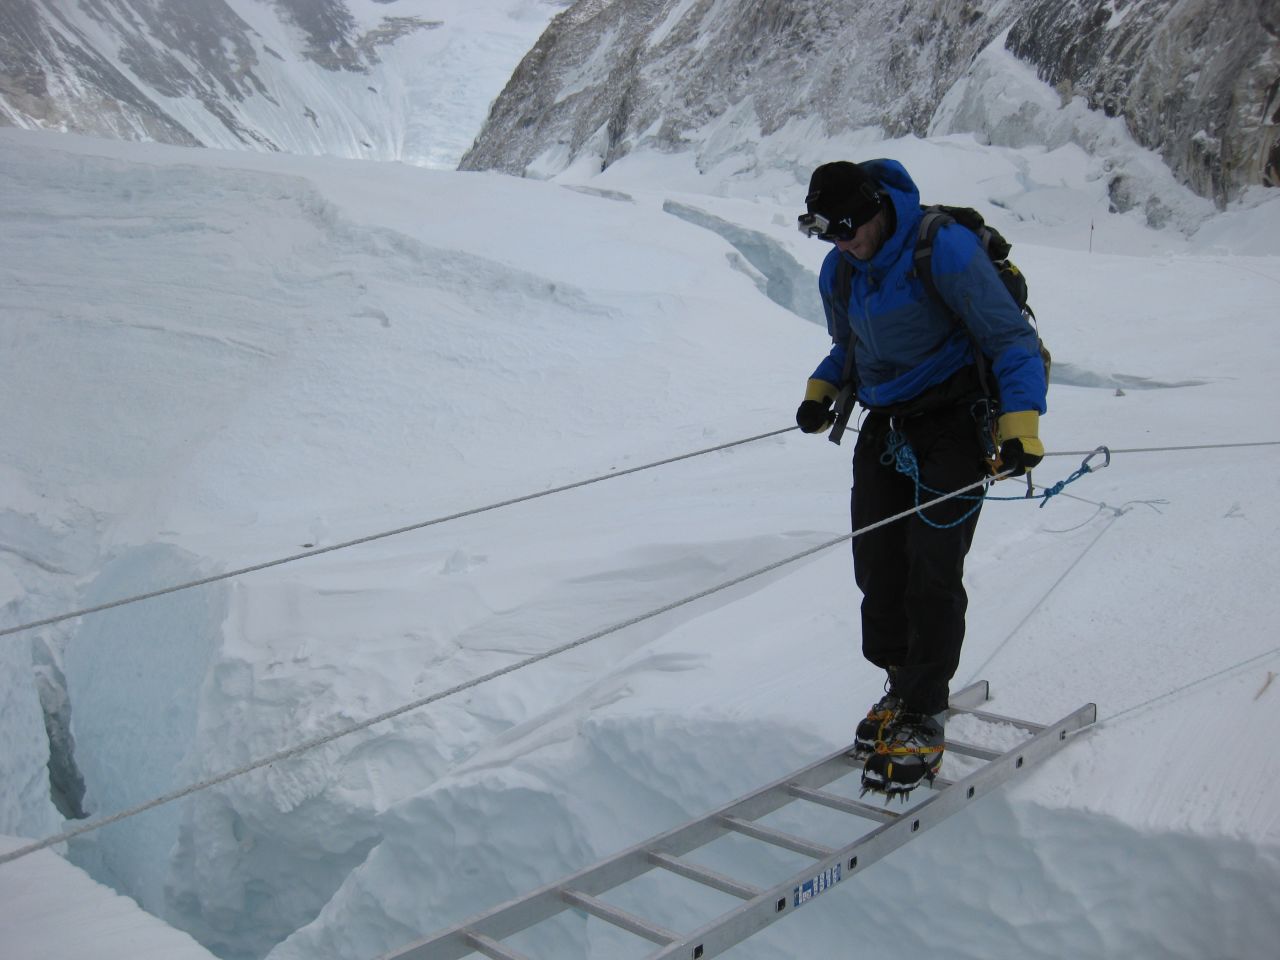 A photo shows Jon Kedrowski crossing a crevasse in the Khumbu Icefall on a ladder.